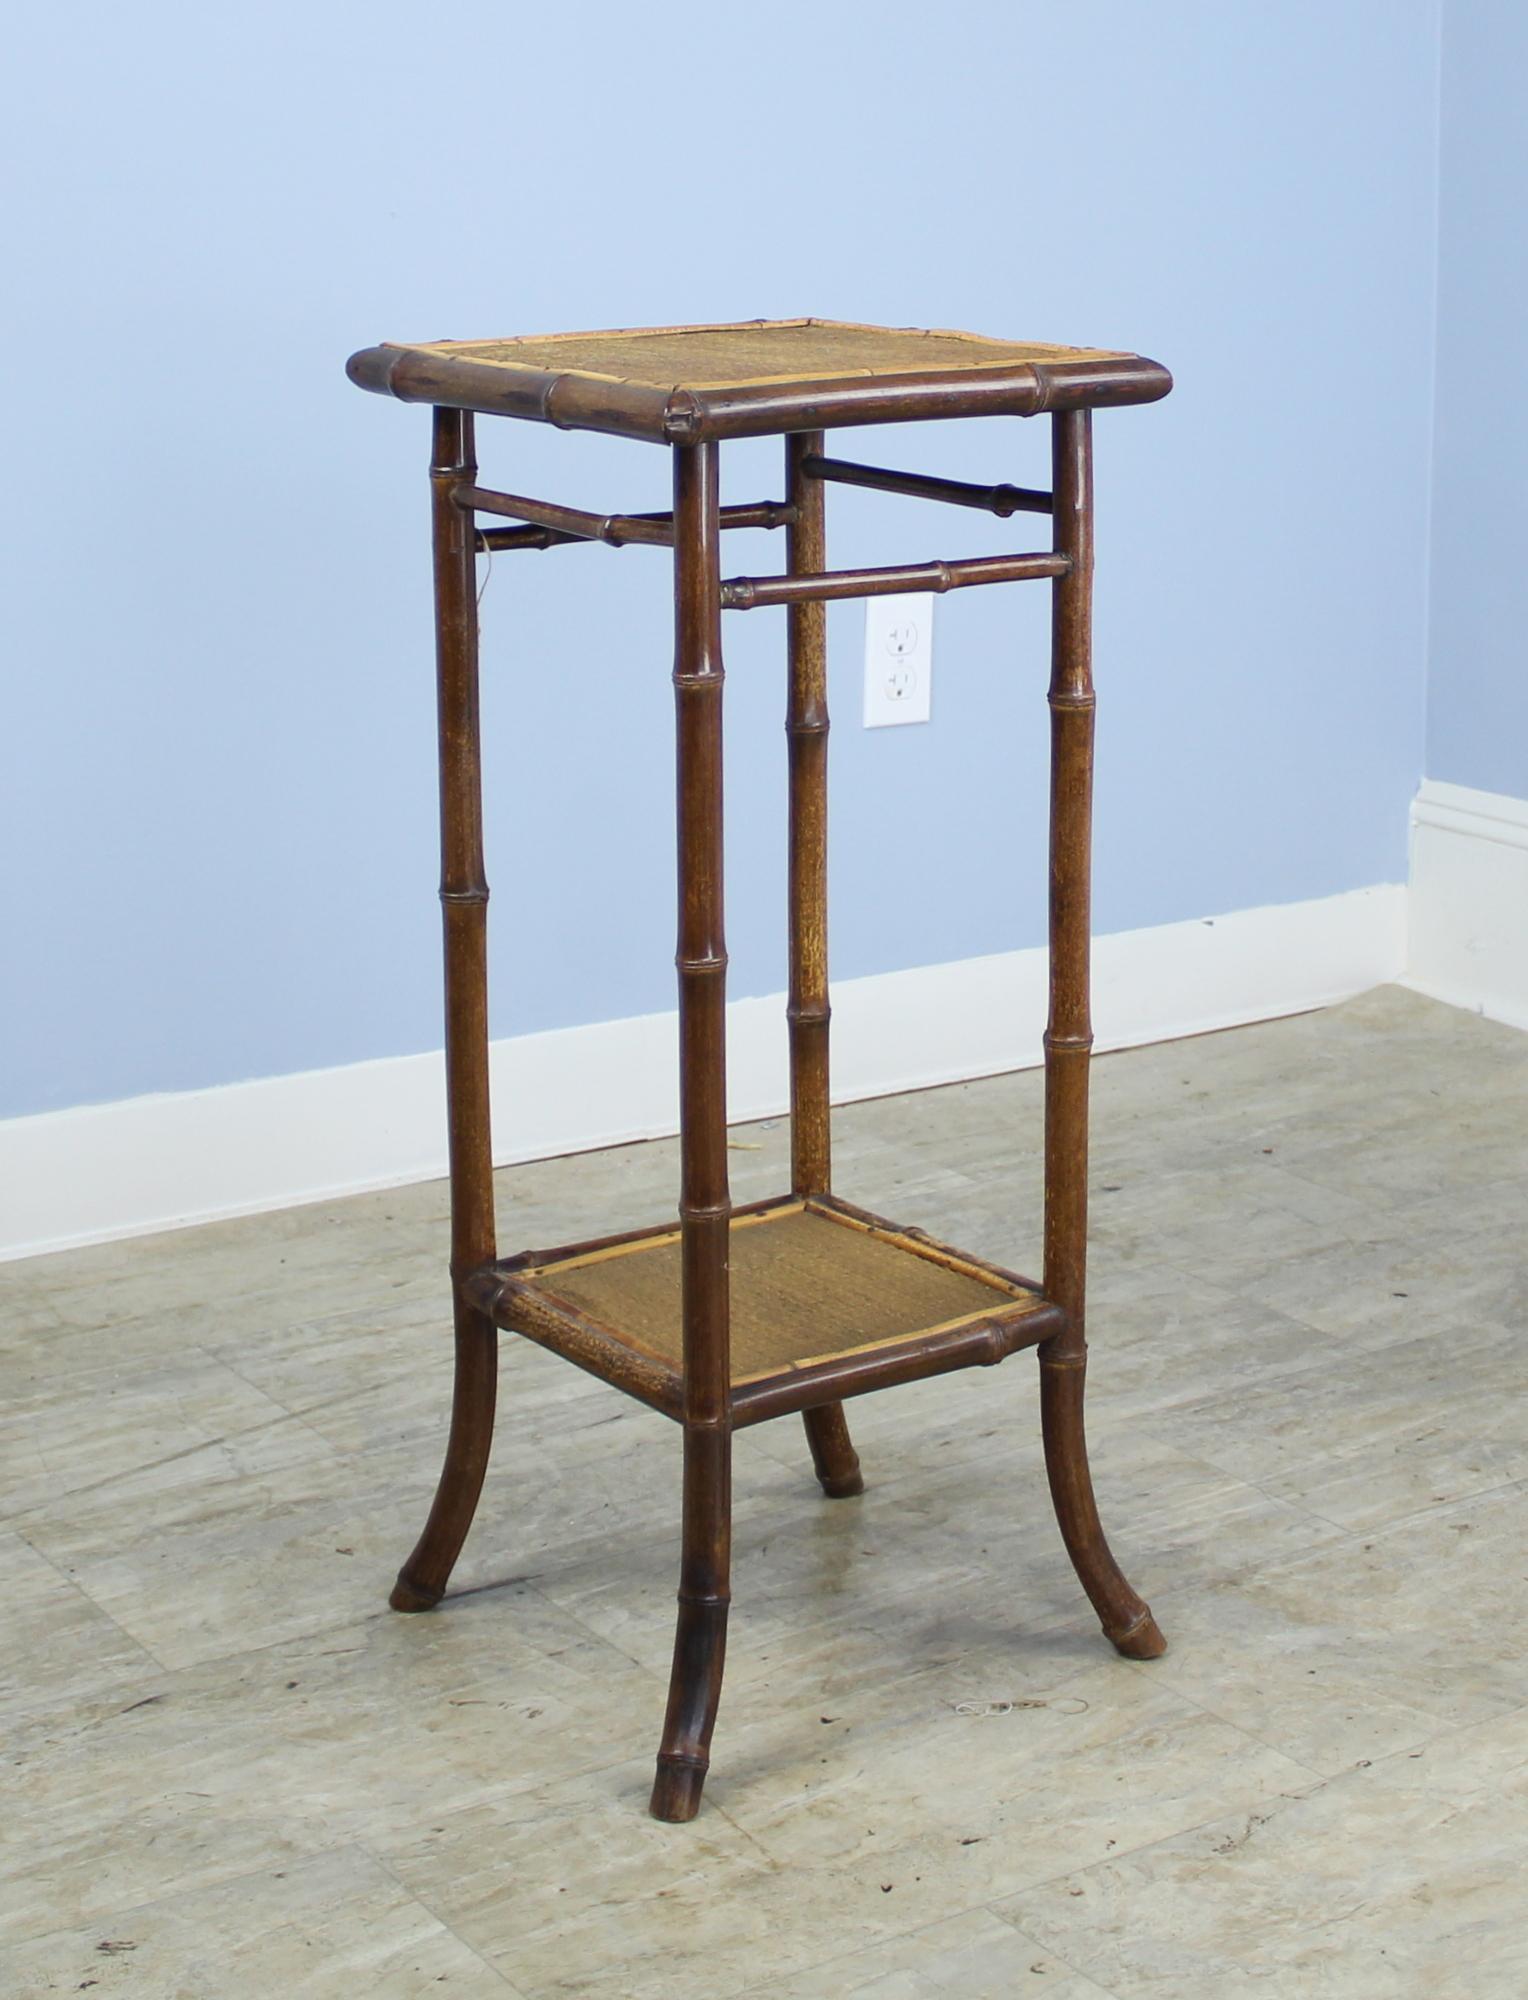 A small bamboo side table, with wonderful antique dark color and patina. The flared painted legs still retain their vibrancy. Sweet!